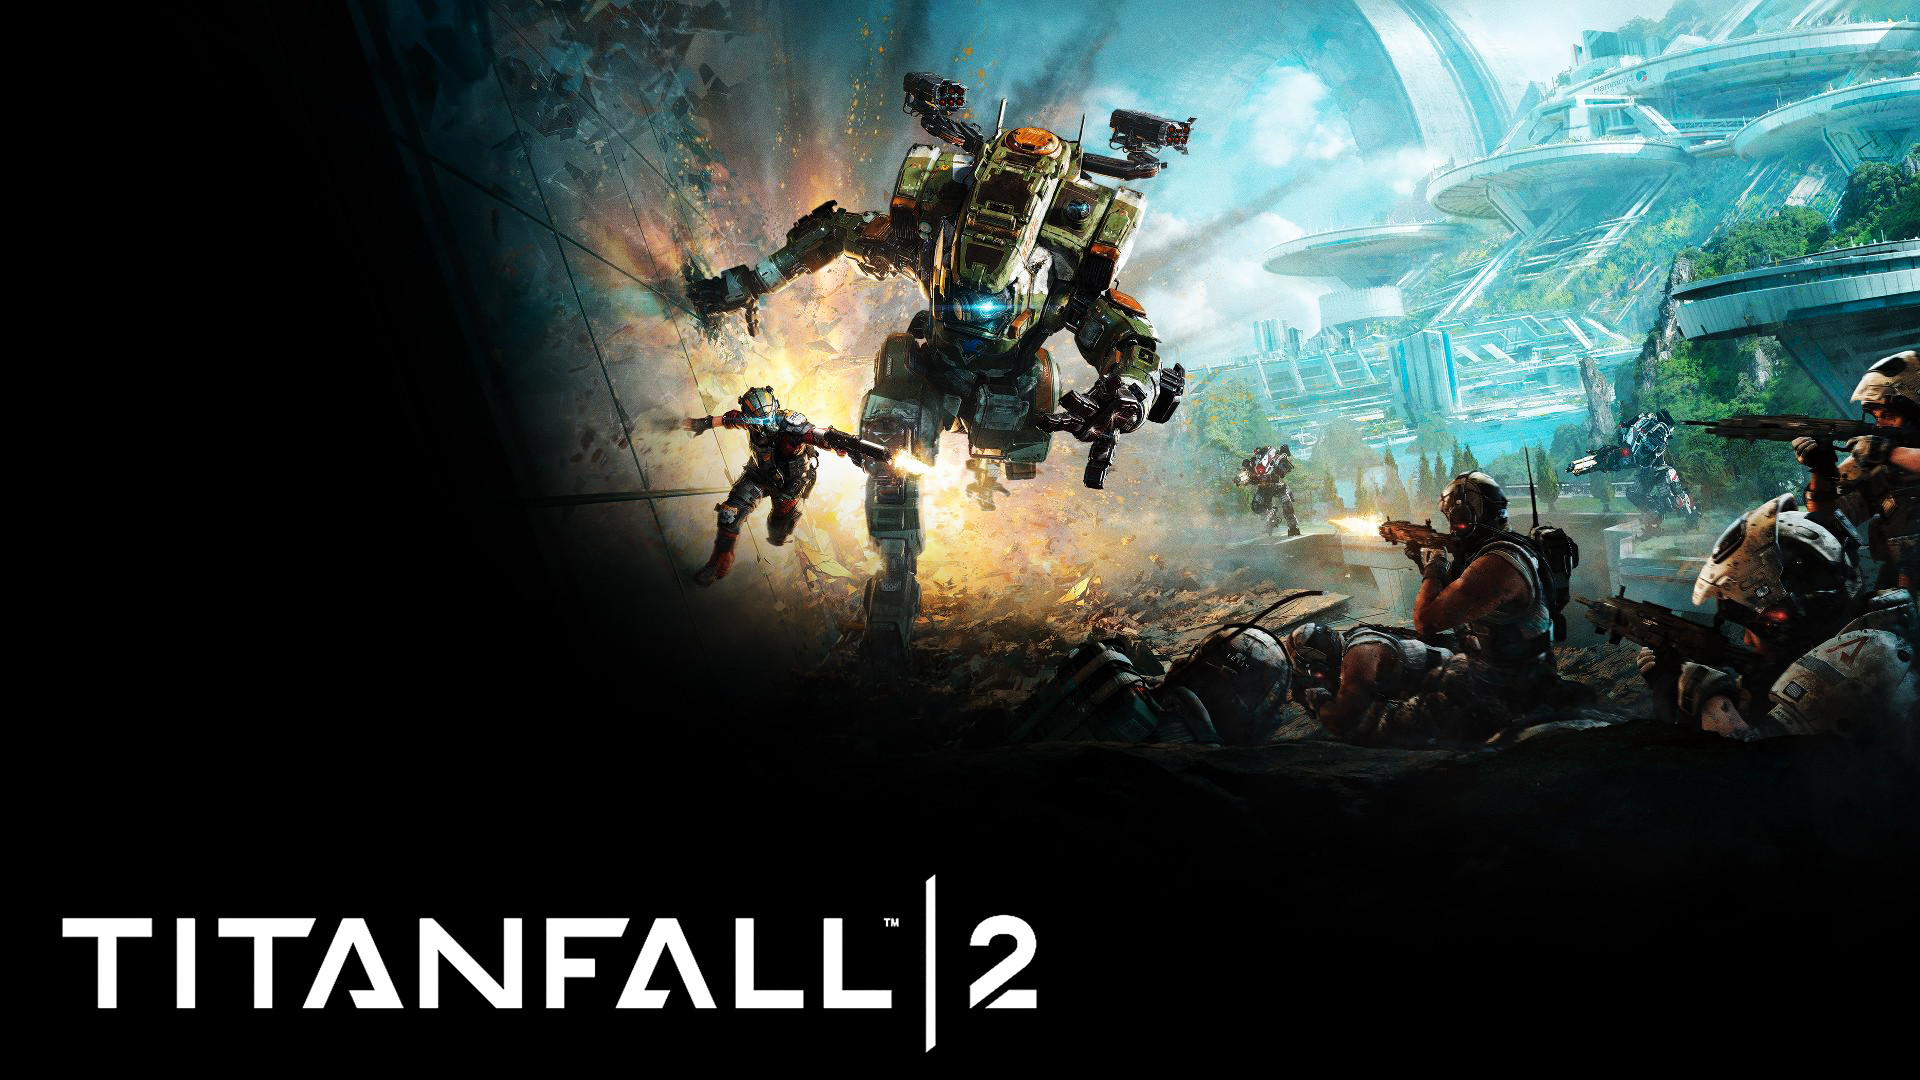 1920x1080 Titanfall 2 Wallpaper Images